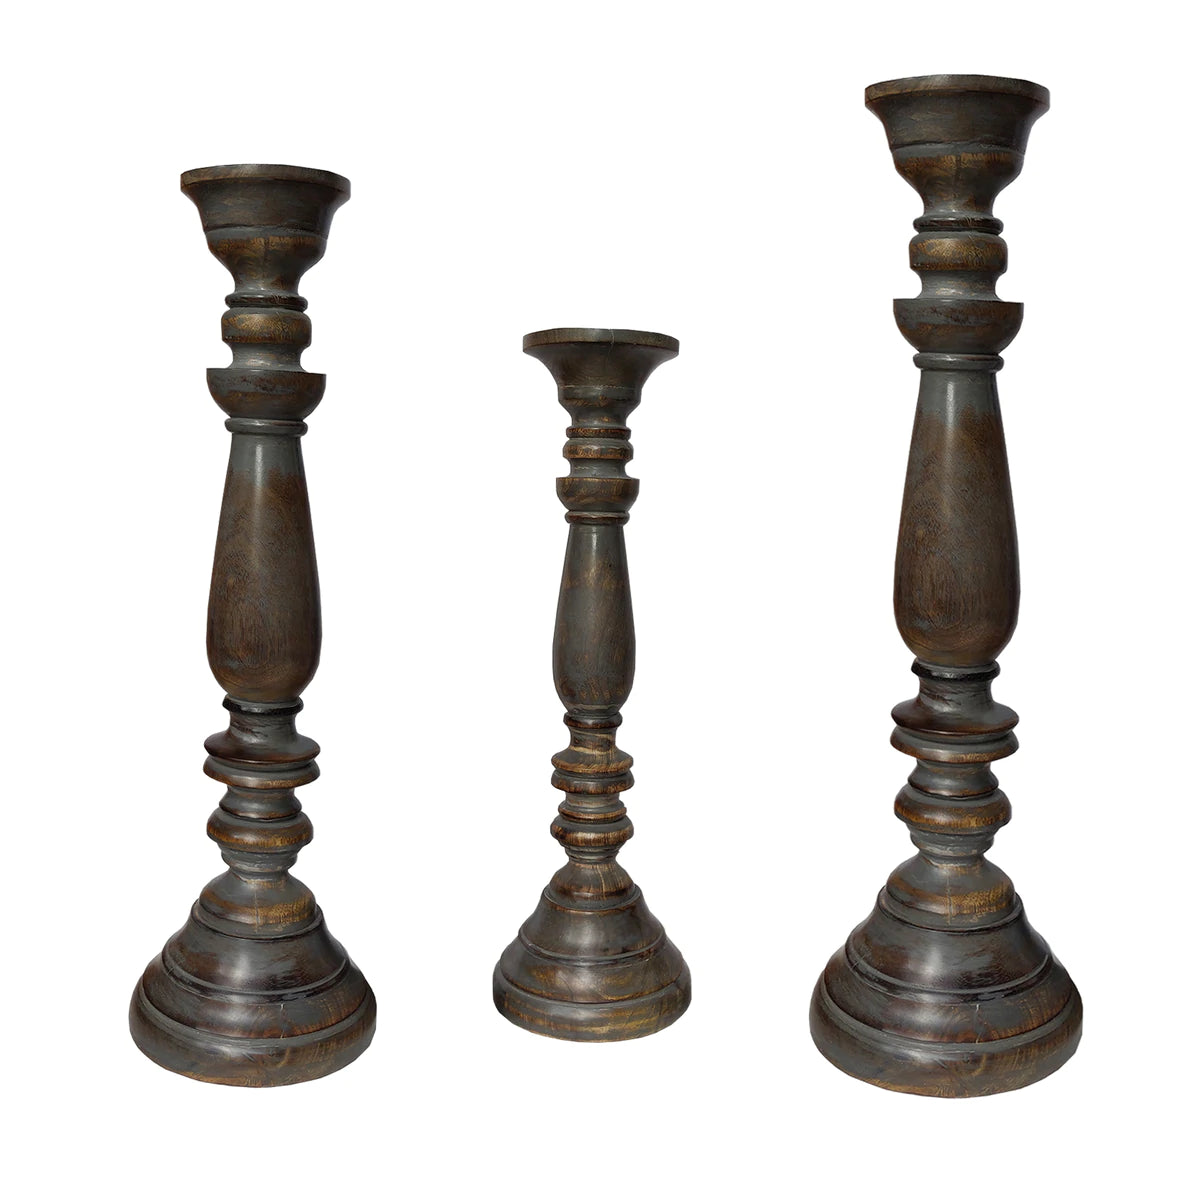 Handmade Pillar Shape Wooden Candle Holder With Flared Top Set Of 3